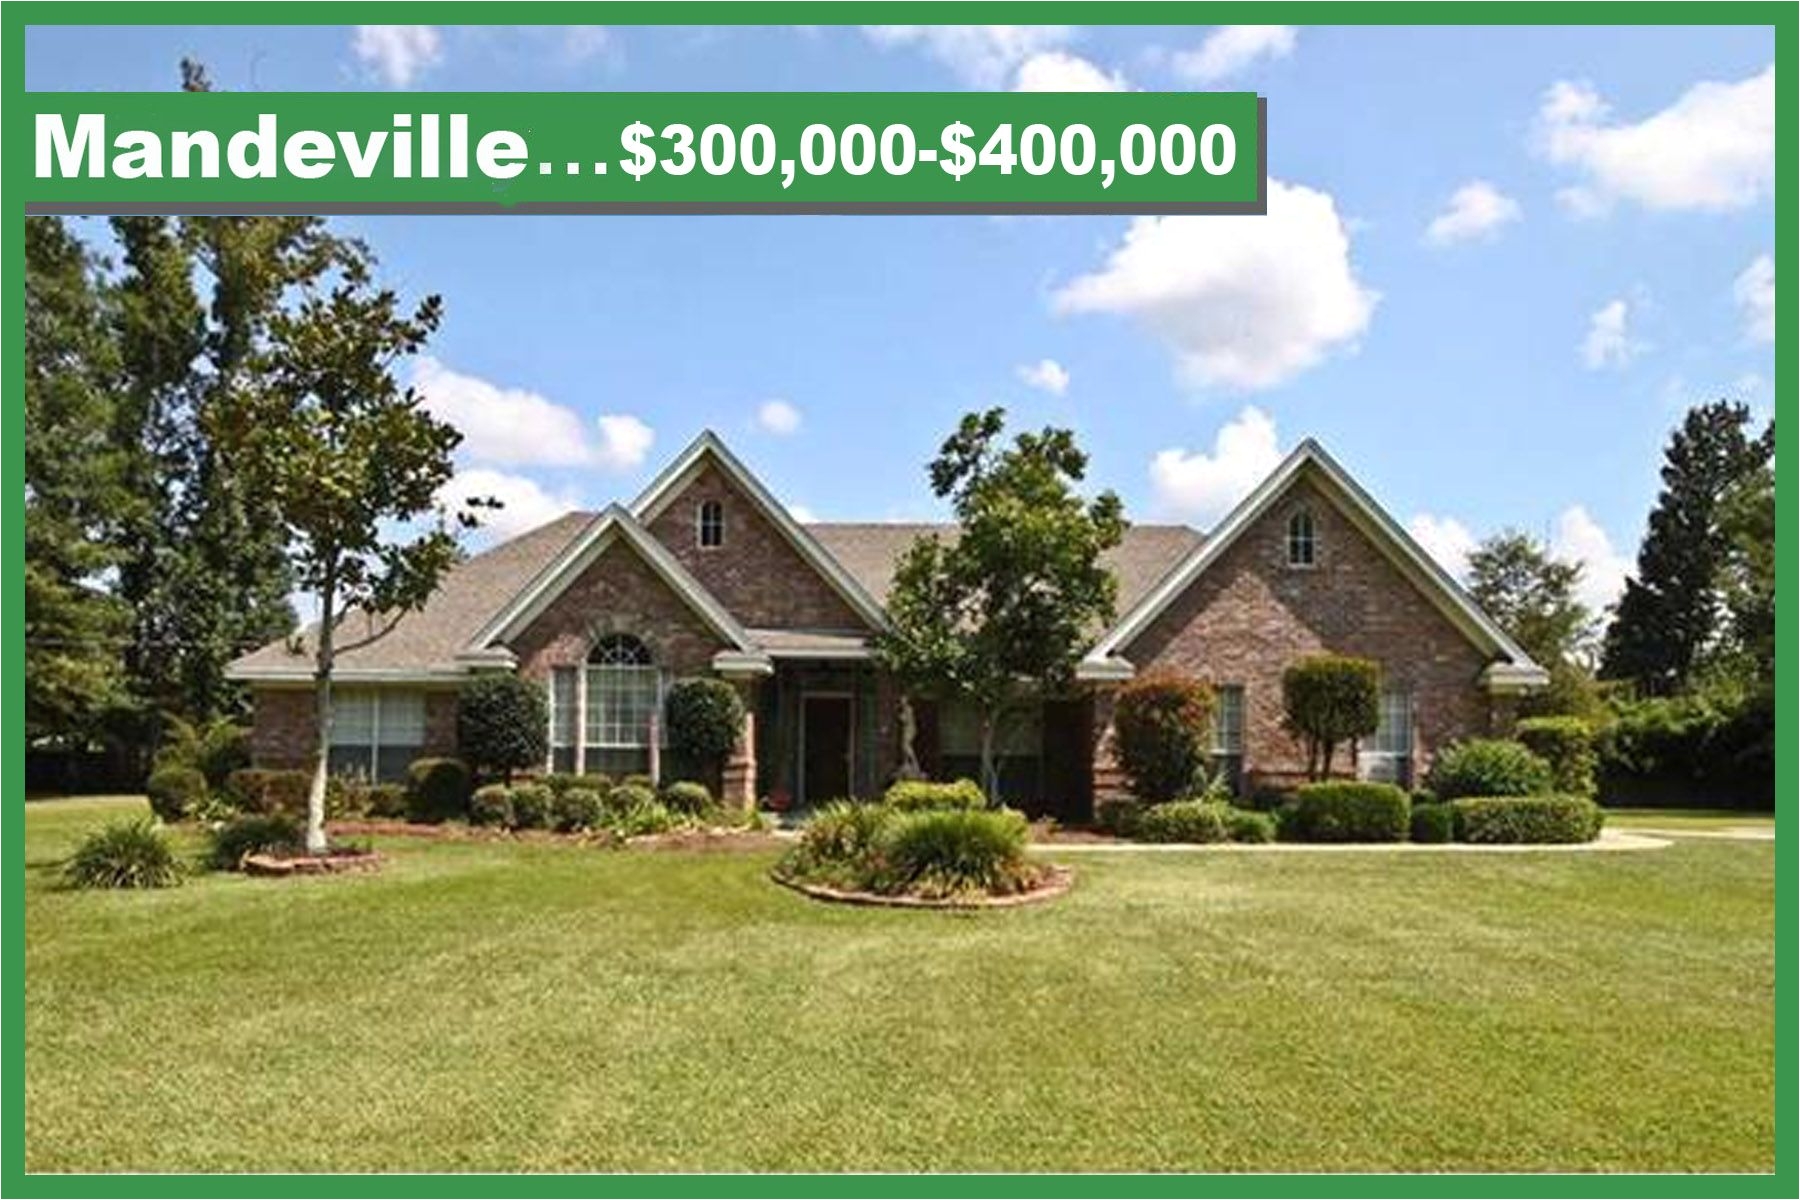 mandeville real estate 300000 400000 full list of all homes real estate land in the subdivision located in st tammany parish